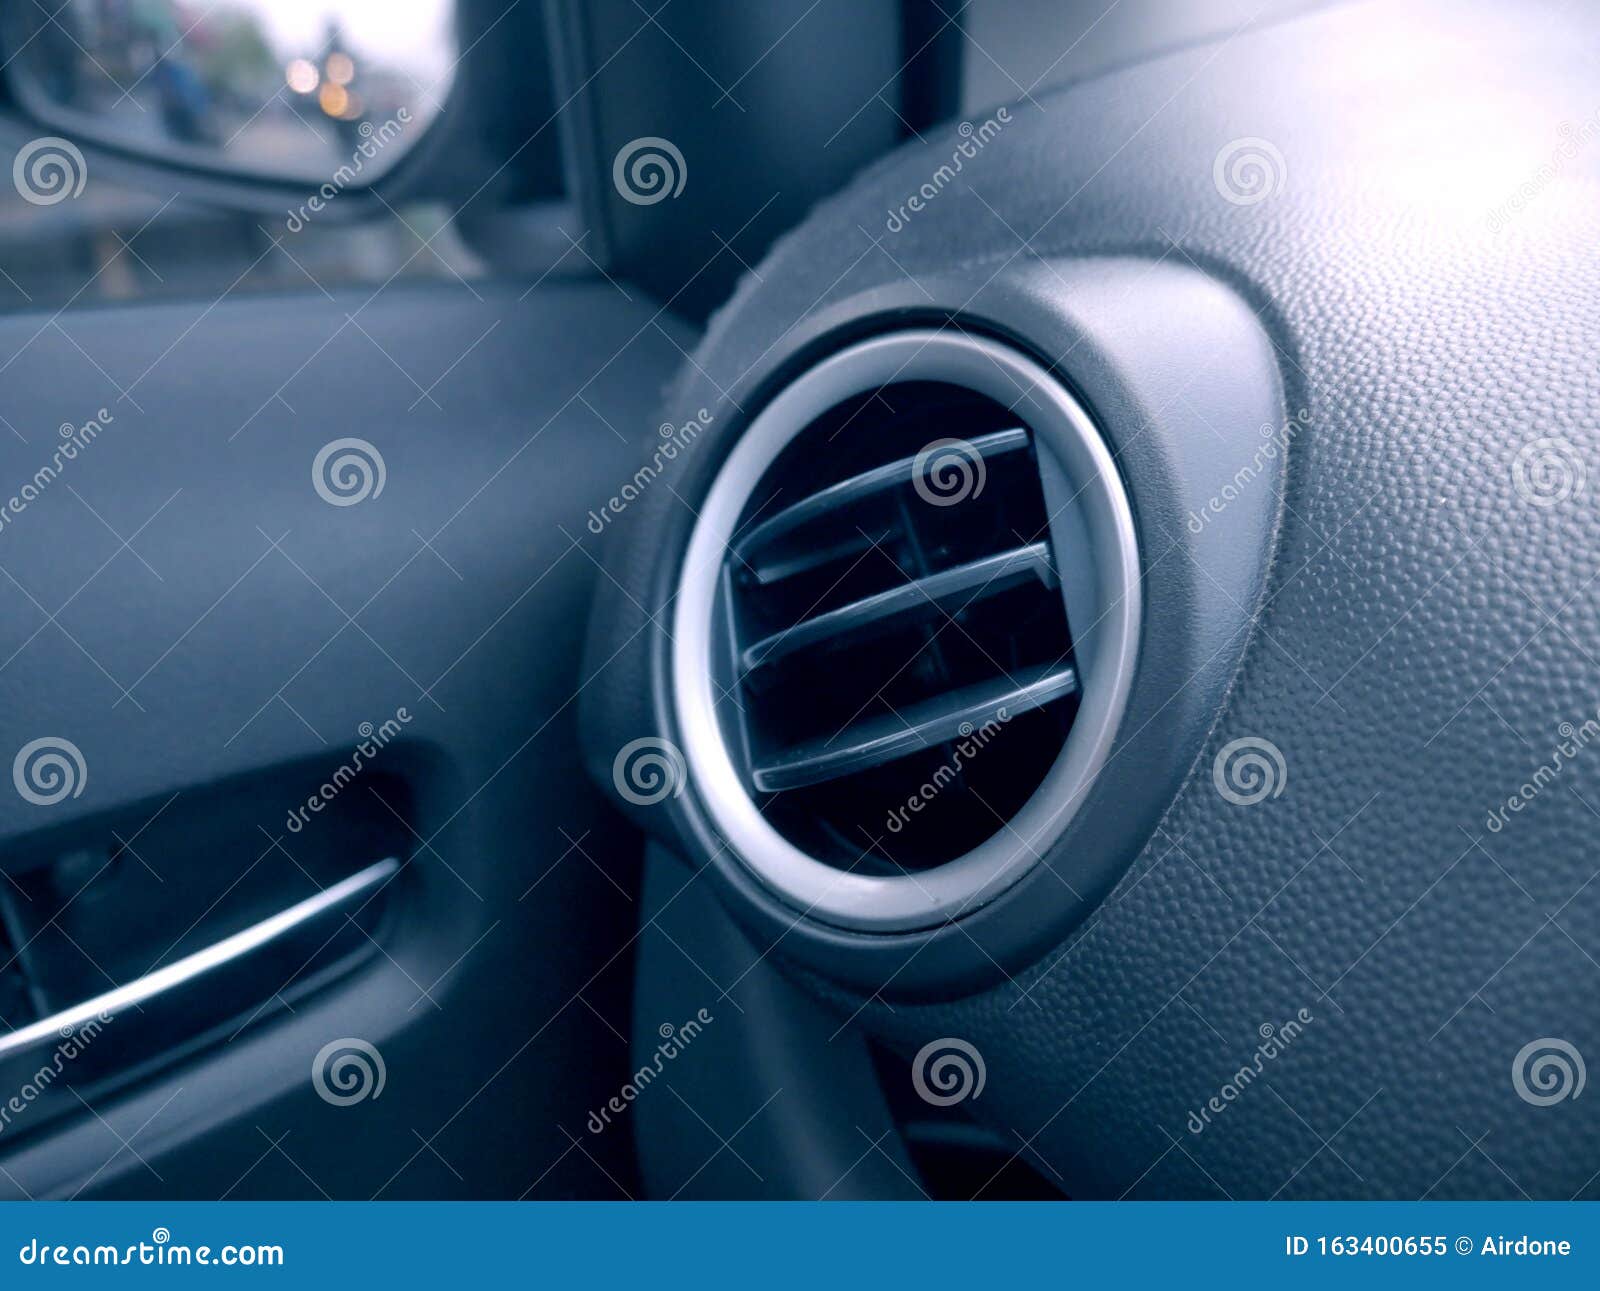 Car Air Conditioner Panel Stock Image Image Of Dashboard 163400655